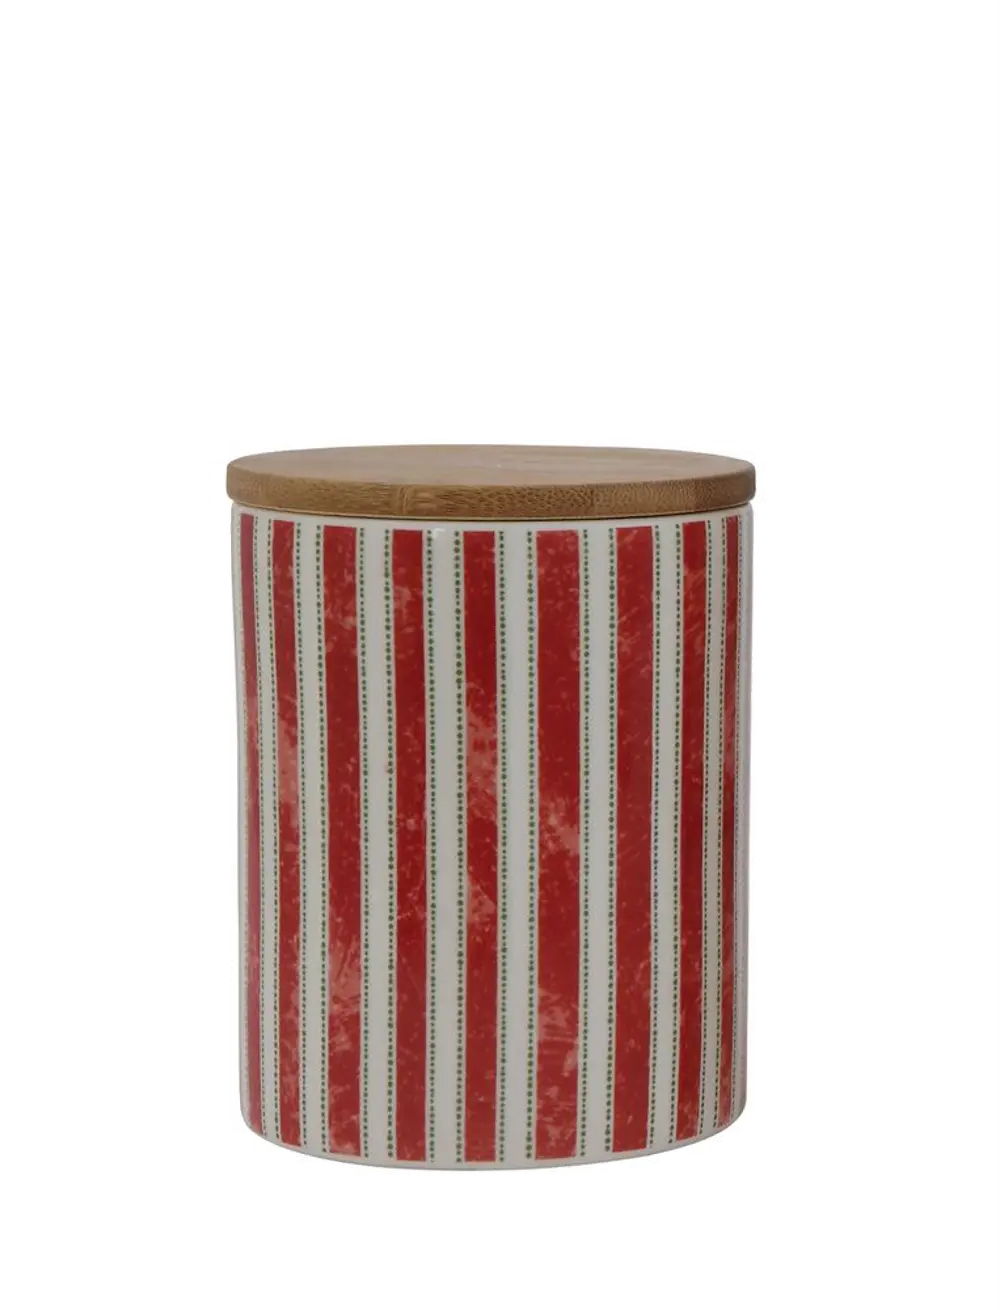 XM3926 Red, White and Green Stripe Ceramic Canister with Wood Lid-1